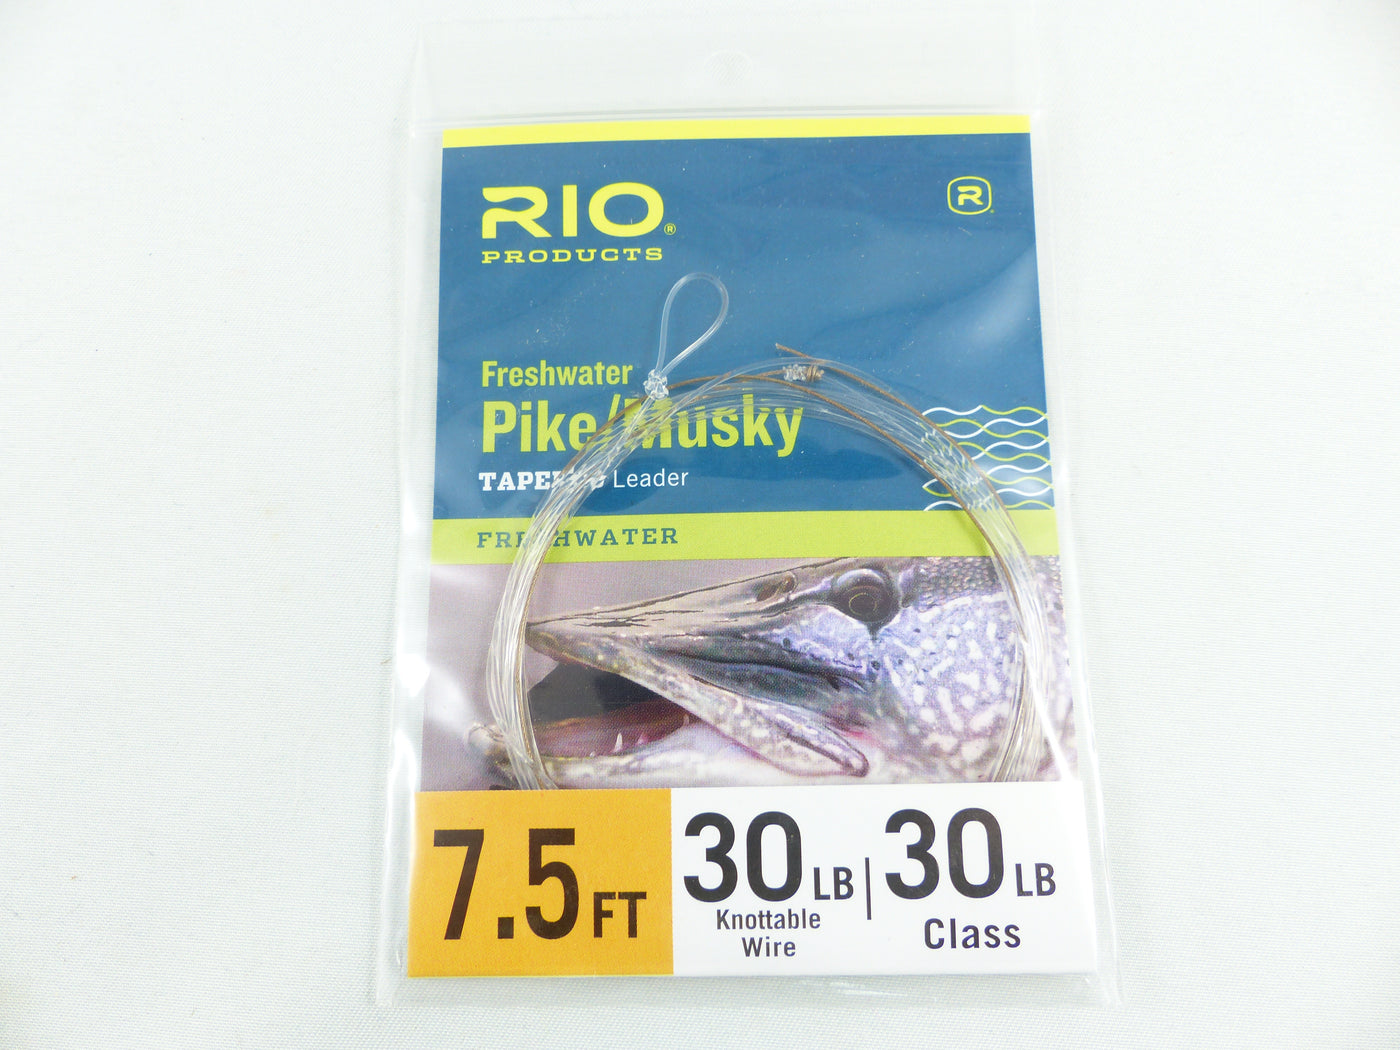 Rio Pike/Musky 7,5FT Knottable